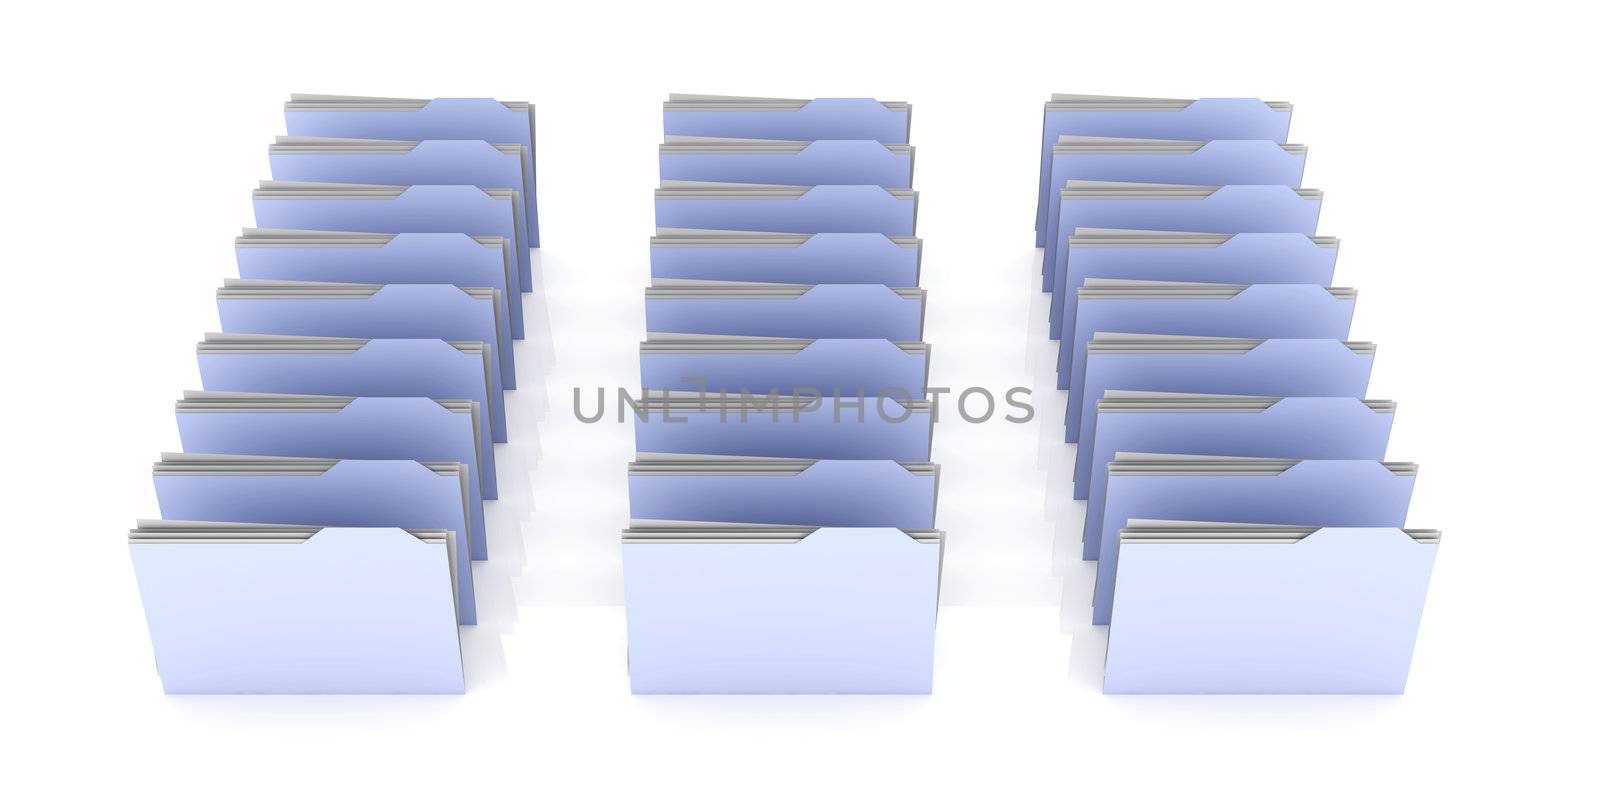 3D rendered Illustration. Isolated on white.
